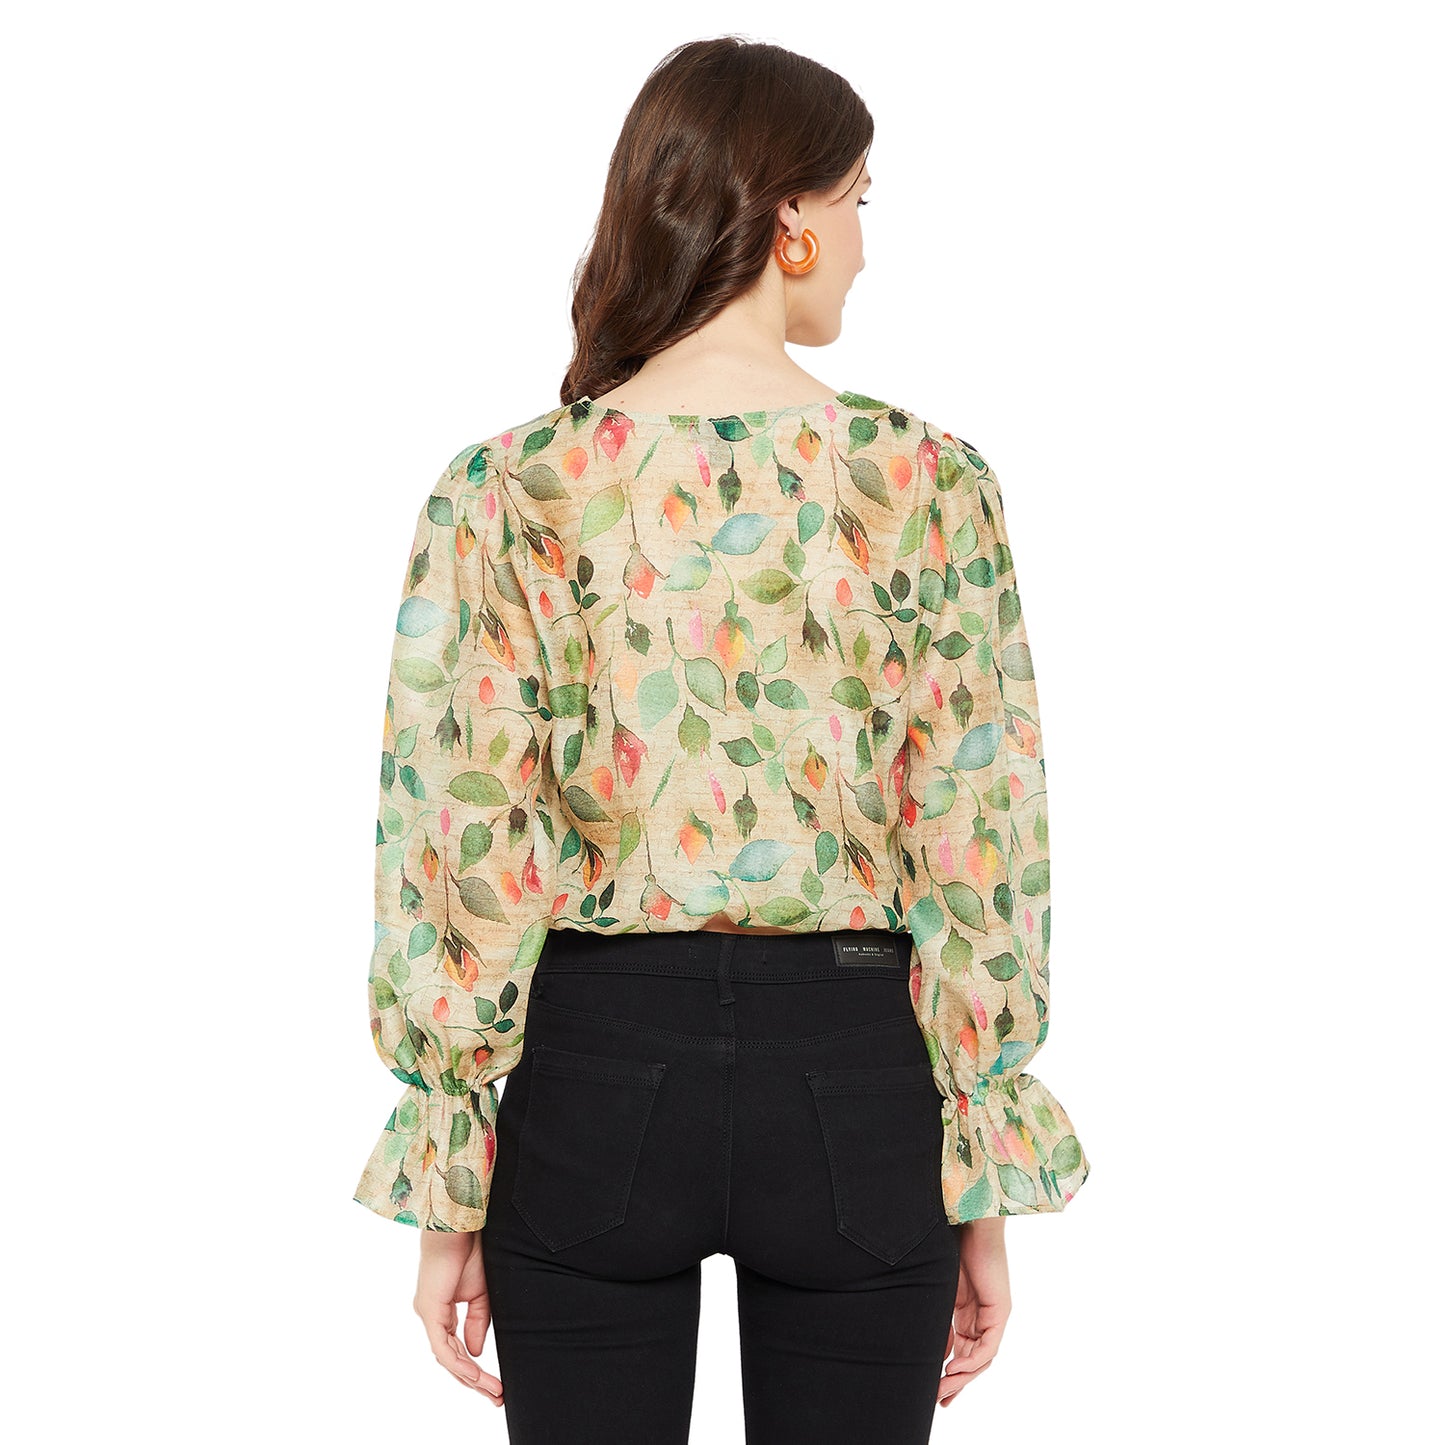 LY2 Floral print with v-neck smart casual top